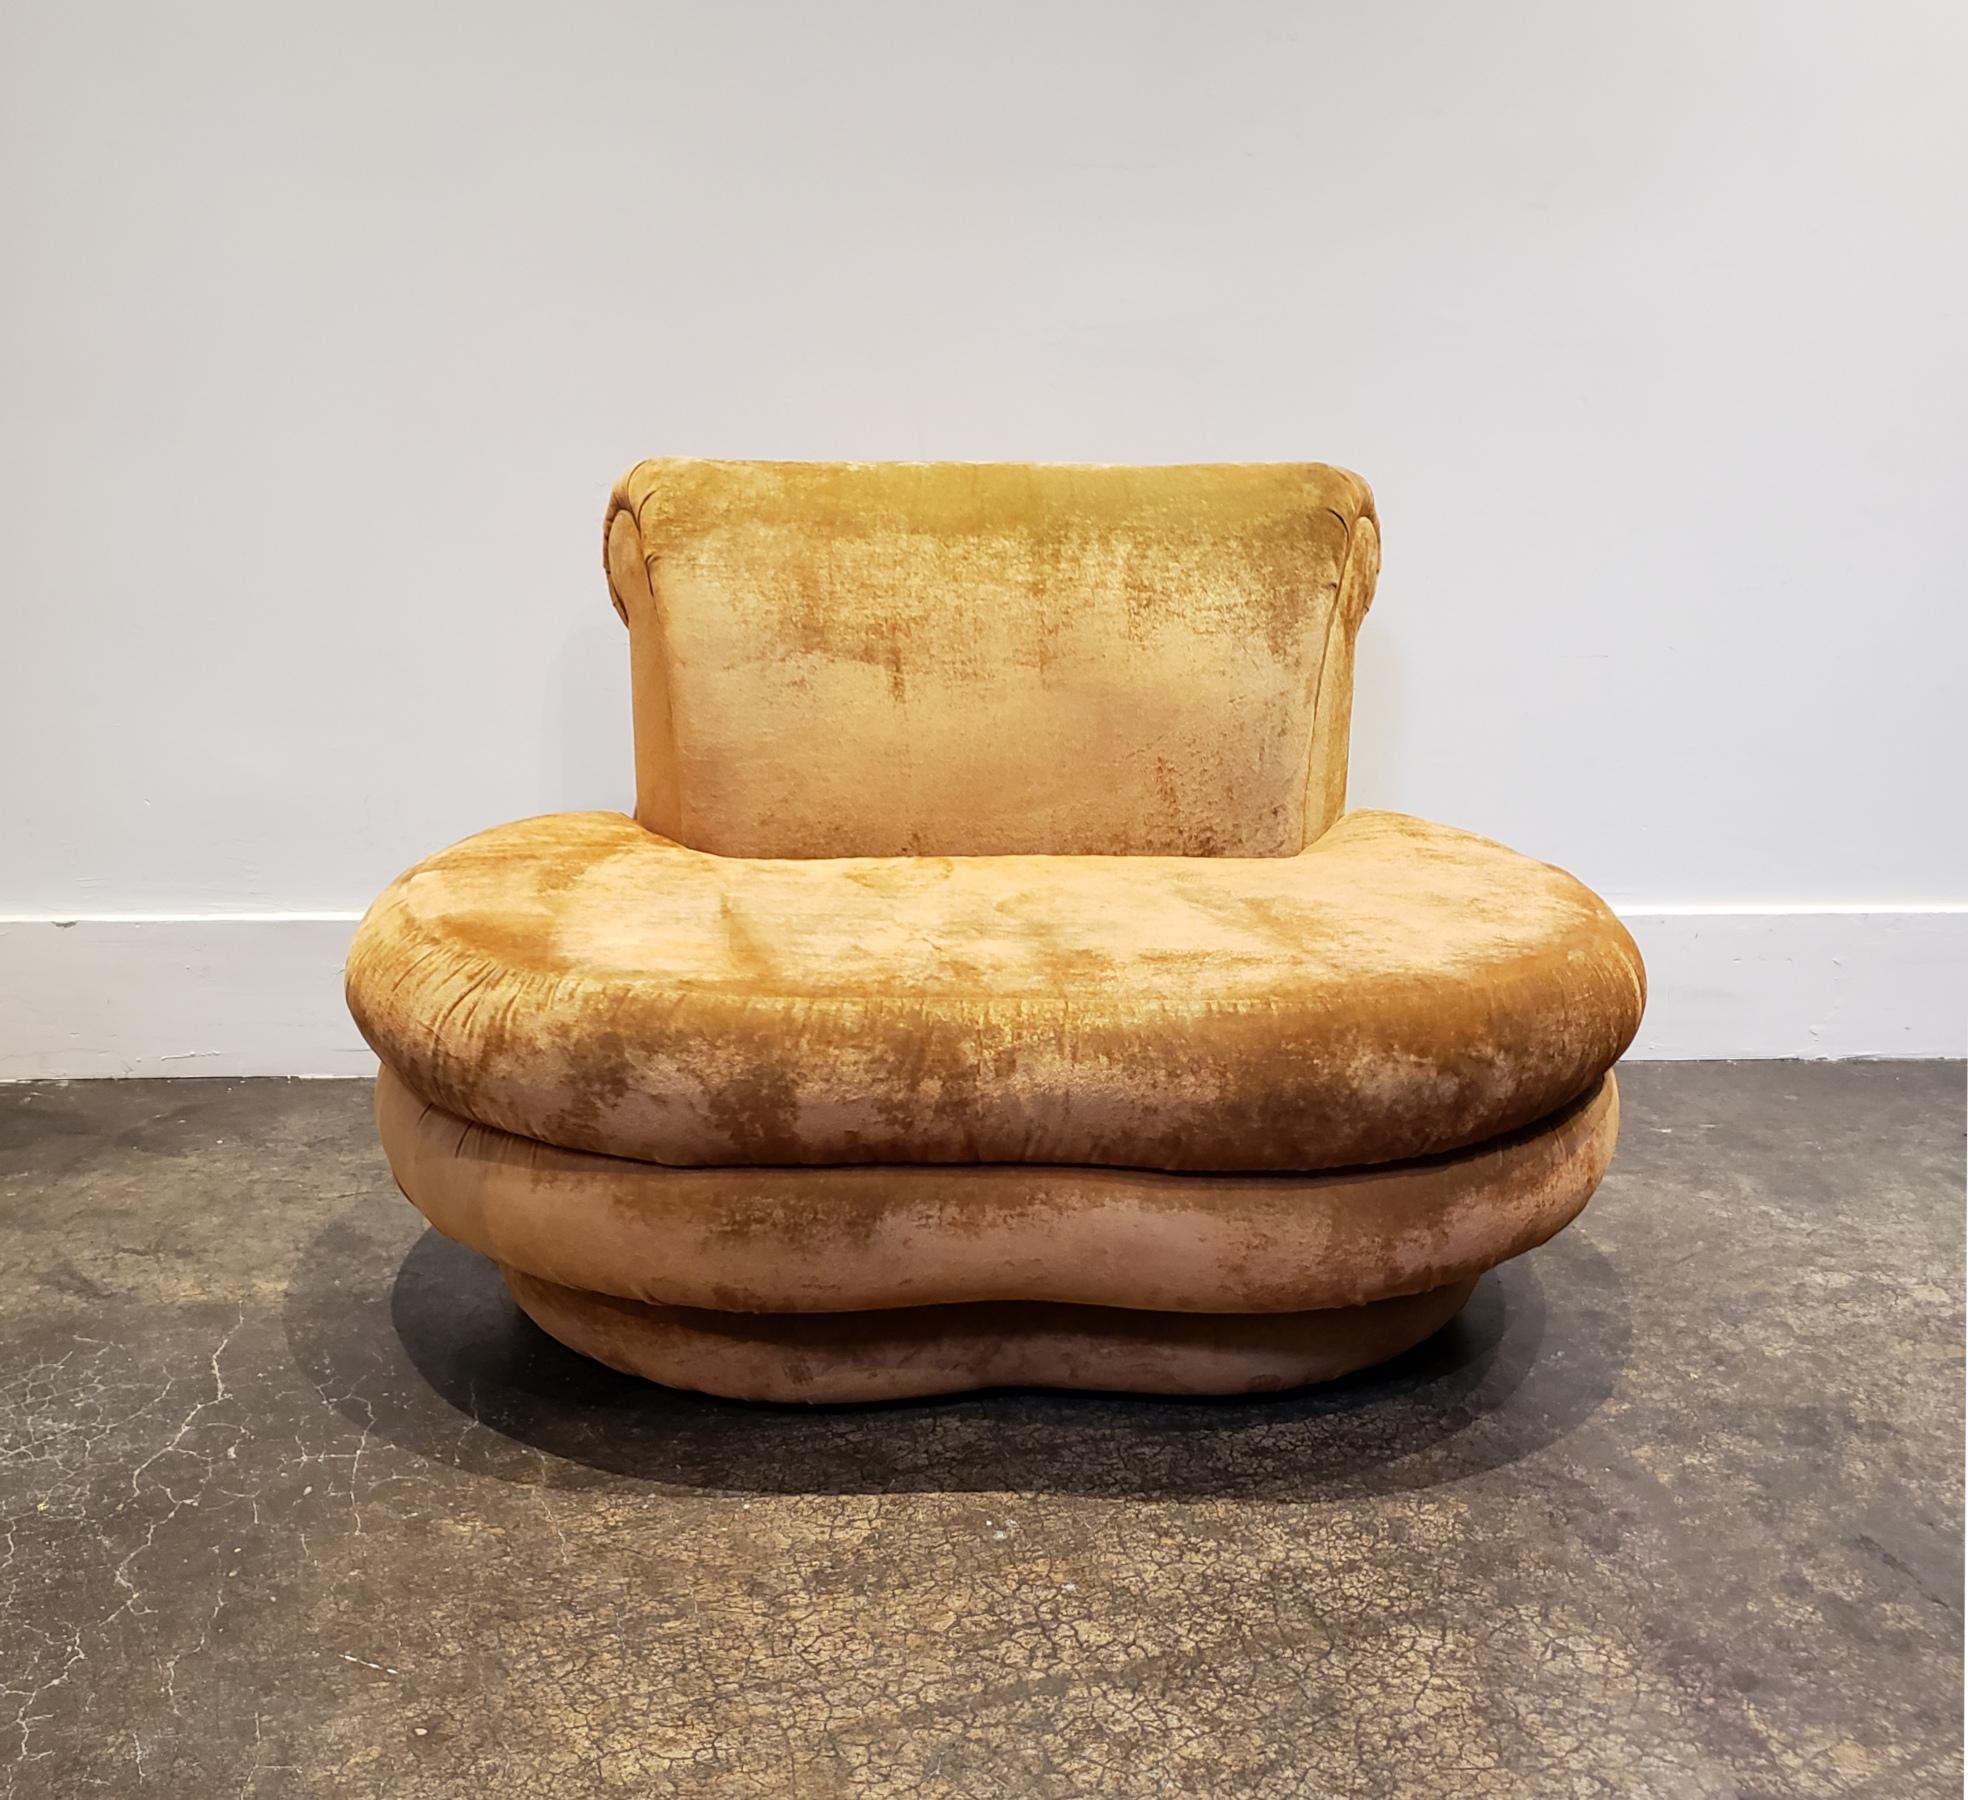 Fun cloud-like, kidney shaped sofa with stacked padded edges designed by Adrian Pearsall and manufactured by Comfort Designs in the 1980s. Fabric has been cleaned but still shows signs of wear and staining. Priced with re-upholstery in mind.